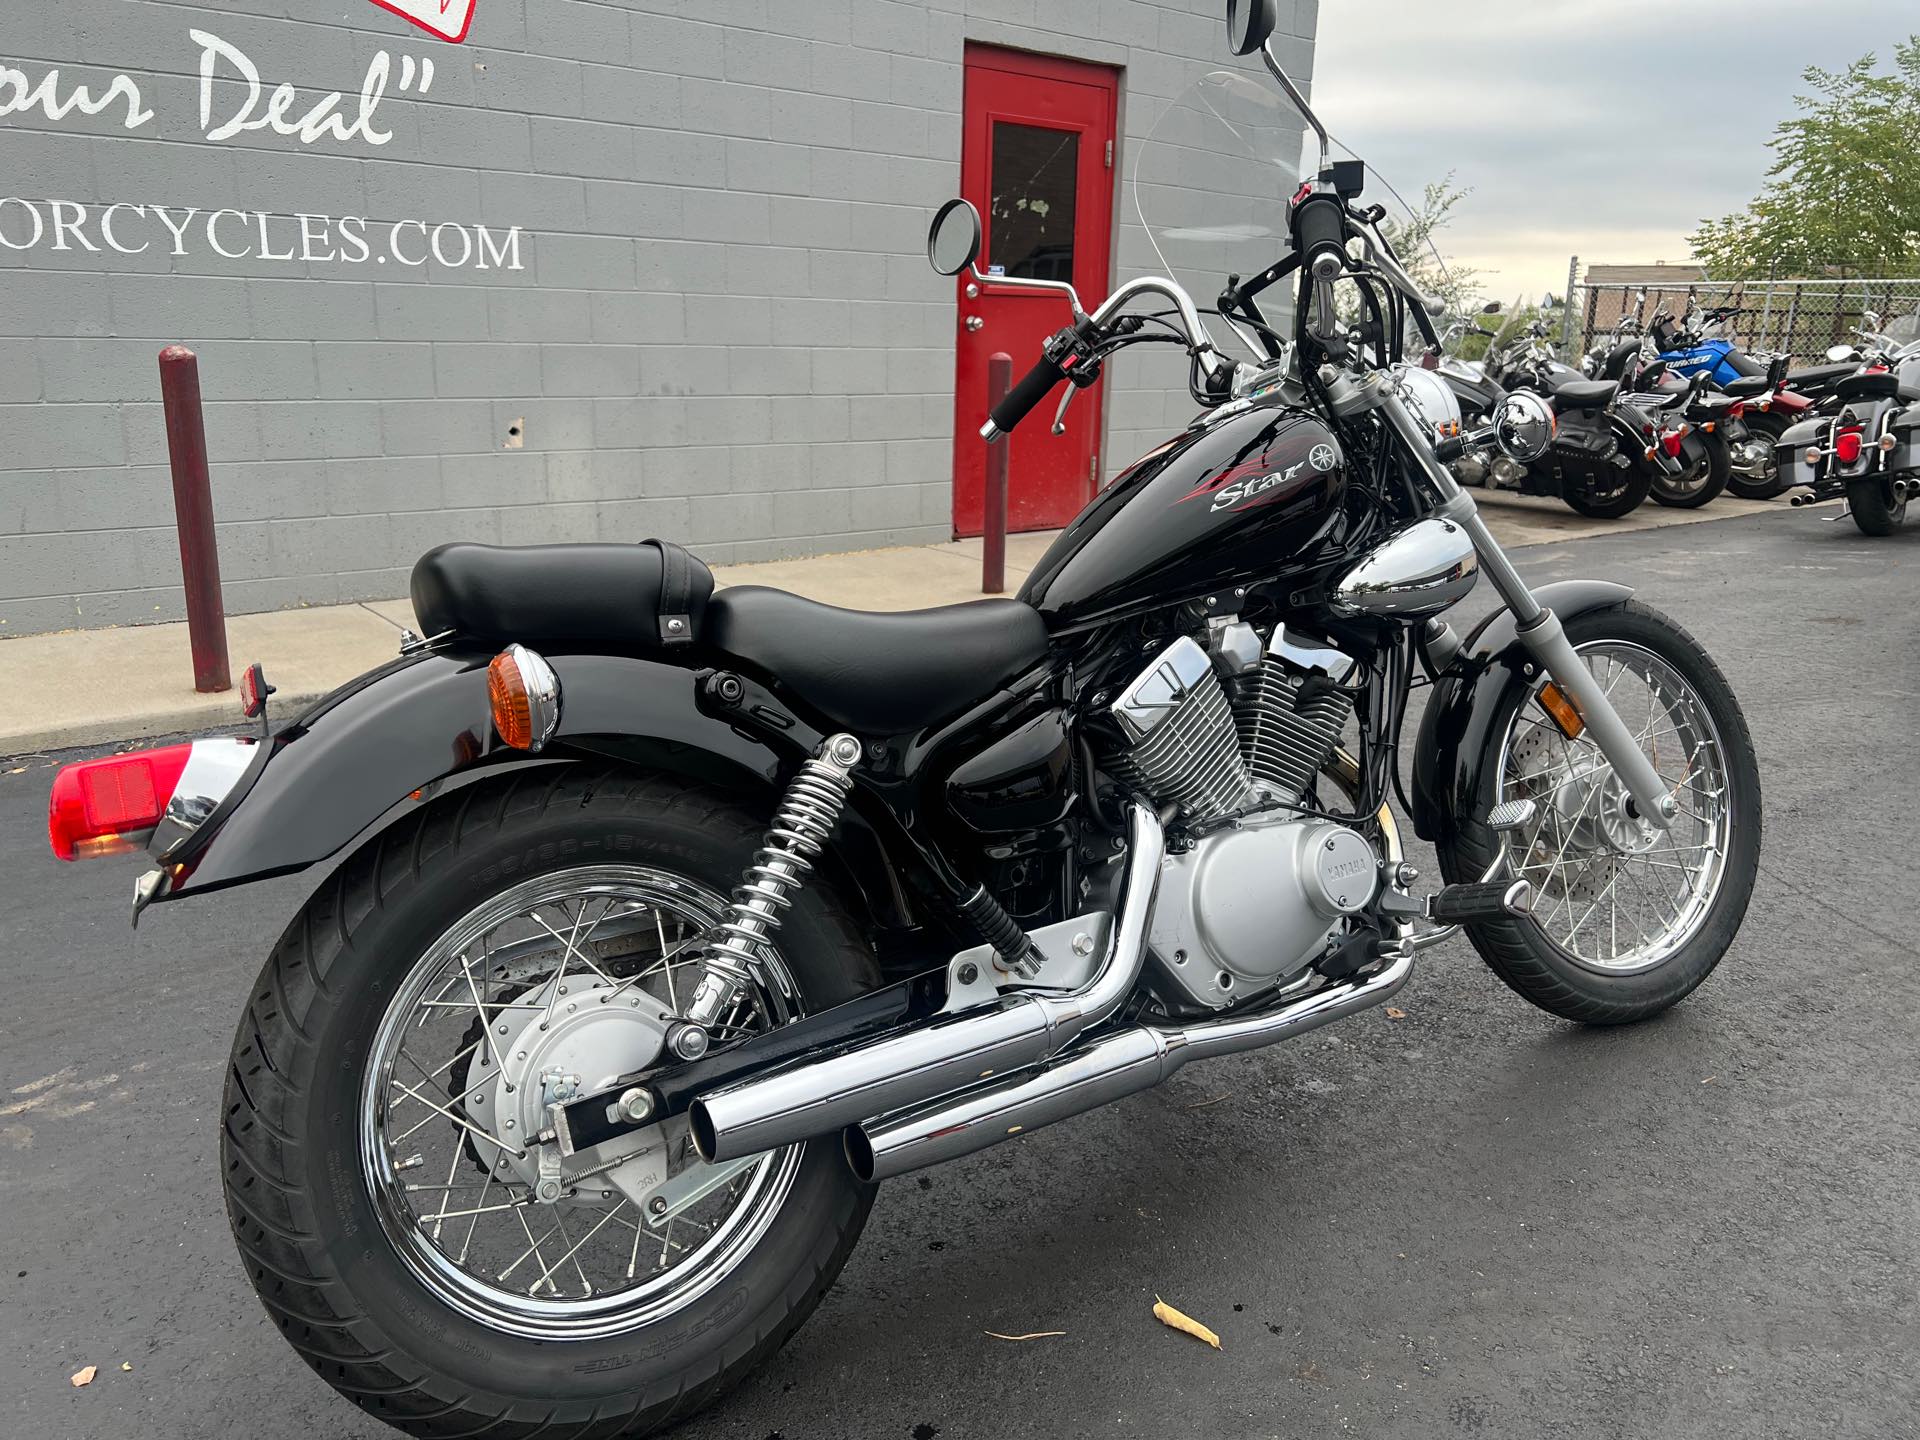 2010 Yamaha V Star 250 at Aces Motorcycles - Fort Collins